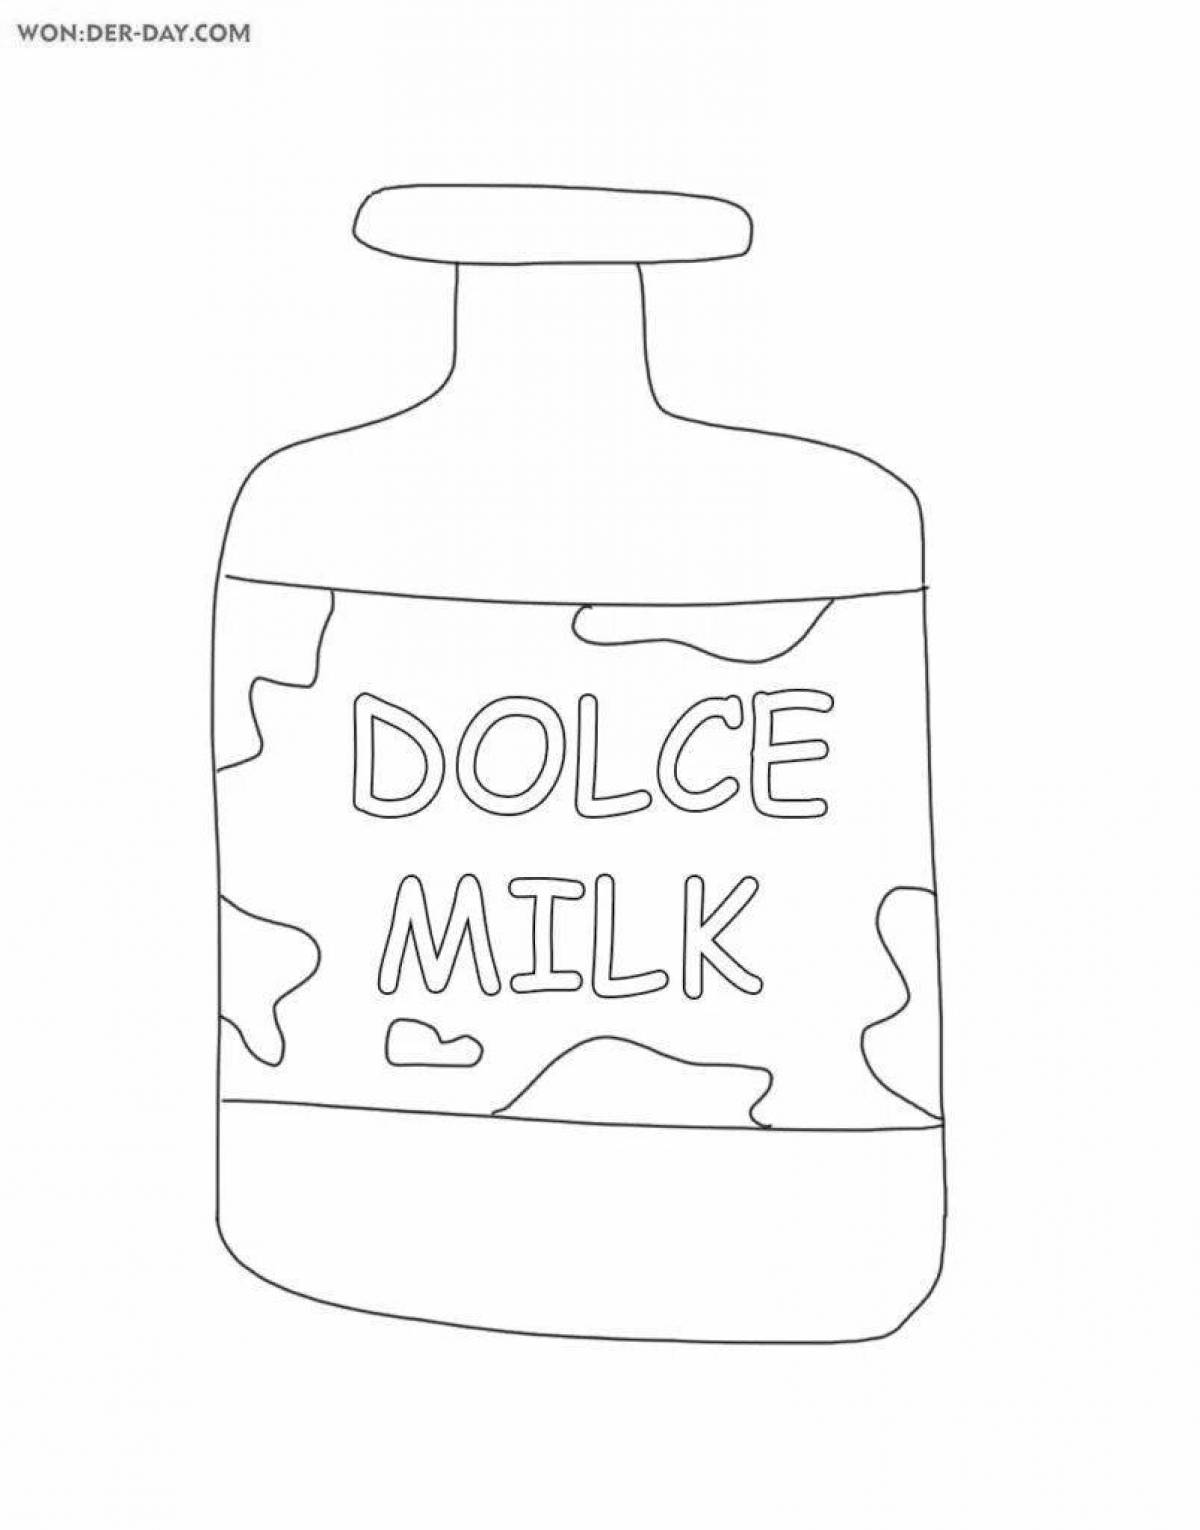 Dolce milka amazing coloring book